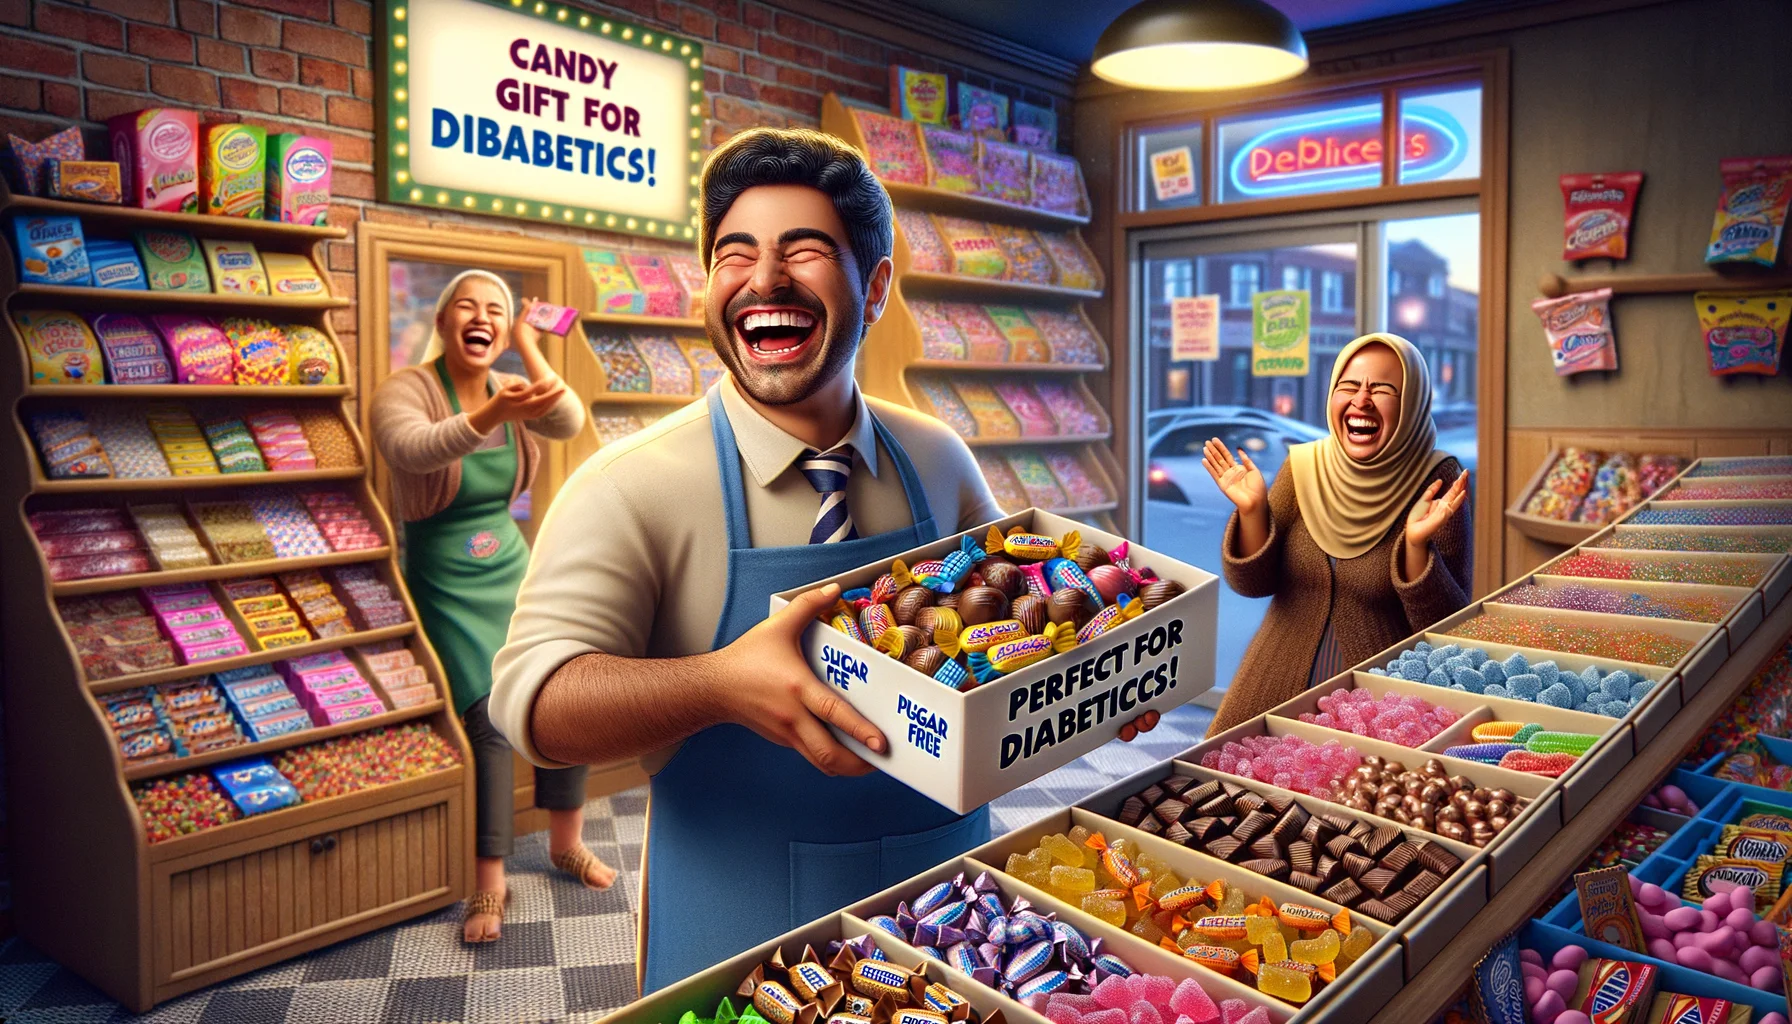 An amusing and realistic image that cleverly showcases 'Candy Gift Ideas for Diabetics'. Imagine this scene: a brightly lit and colorful candy store with shelves full of various sugar-free candies in all shapes and sizes. A Hispanic male shopkeeper with a warm smile presents a box of sugar-free chocolates with a tag reading 'Perfect for Diabetics!'. Nearby, a Middle-Eastern woman laughing out loud holds a packet full of sugar-free gummy bears. The scene creates humor through the sheer irony while also remaining sensitive to the health needs of diabetics.